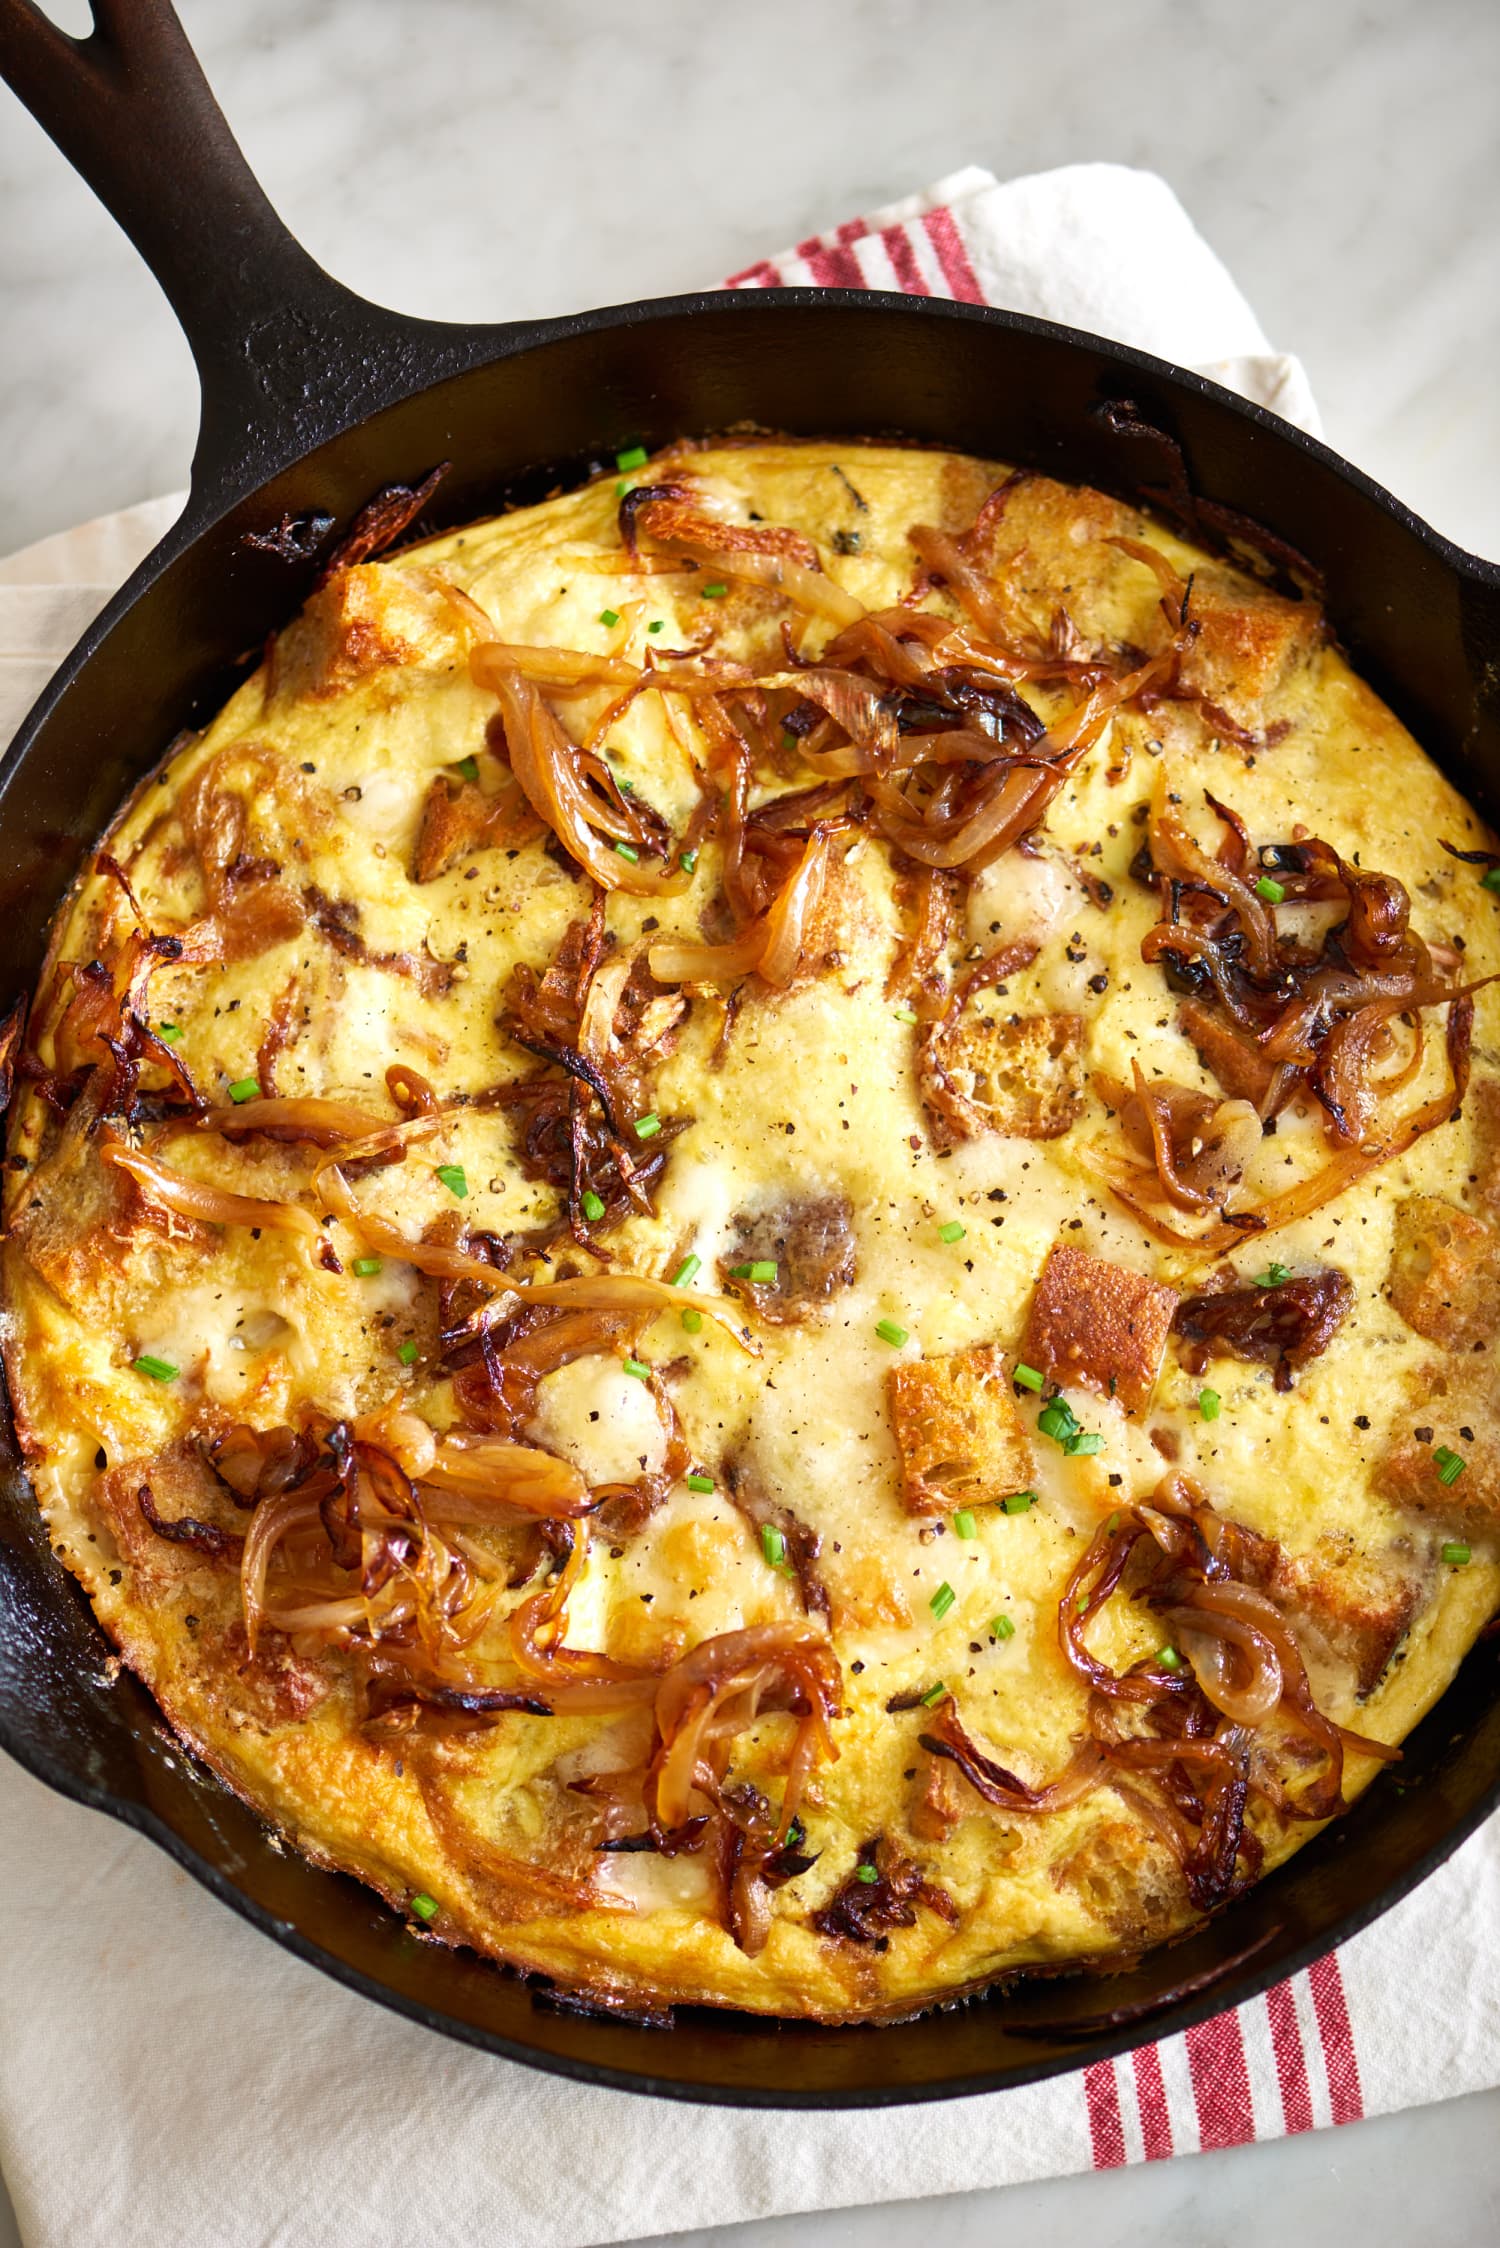 5 Mistakes to Avoid When Making Frittatas